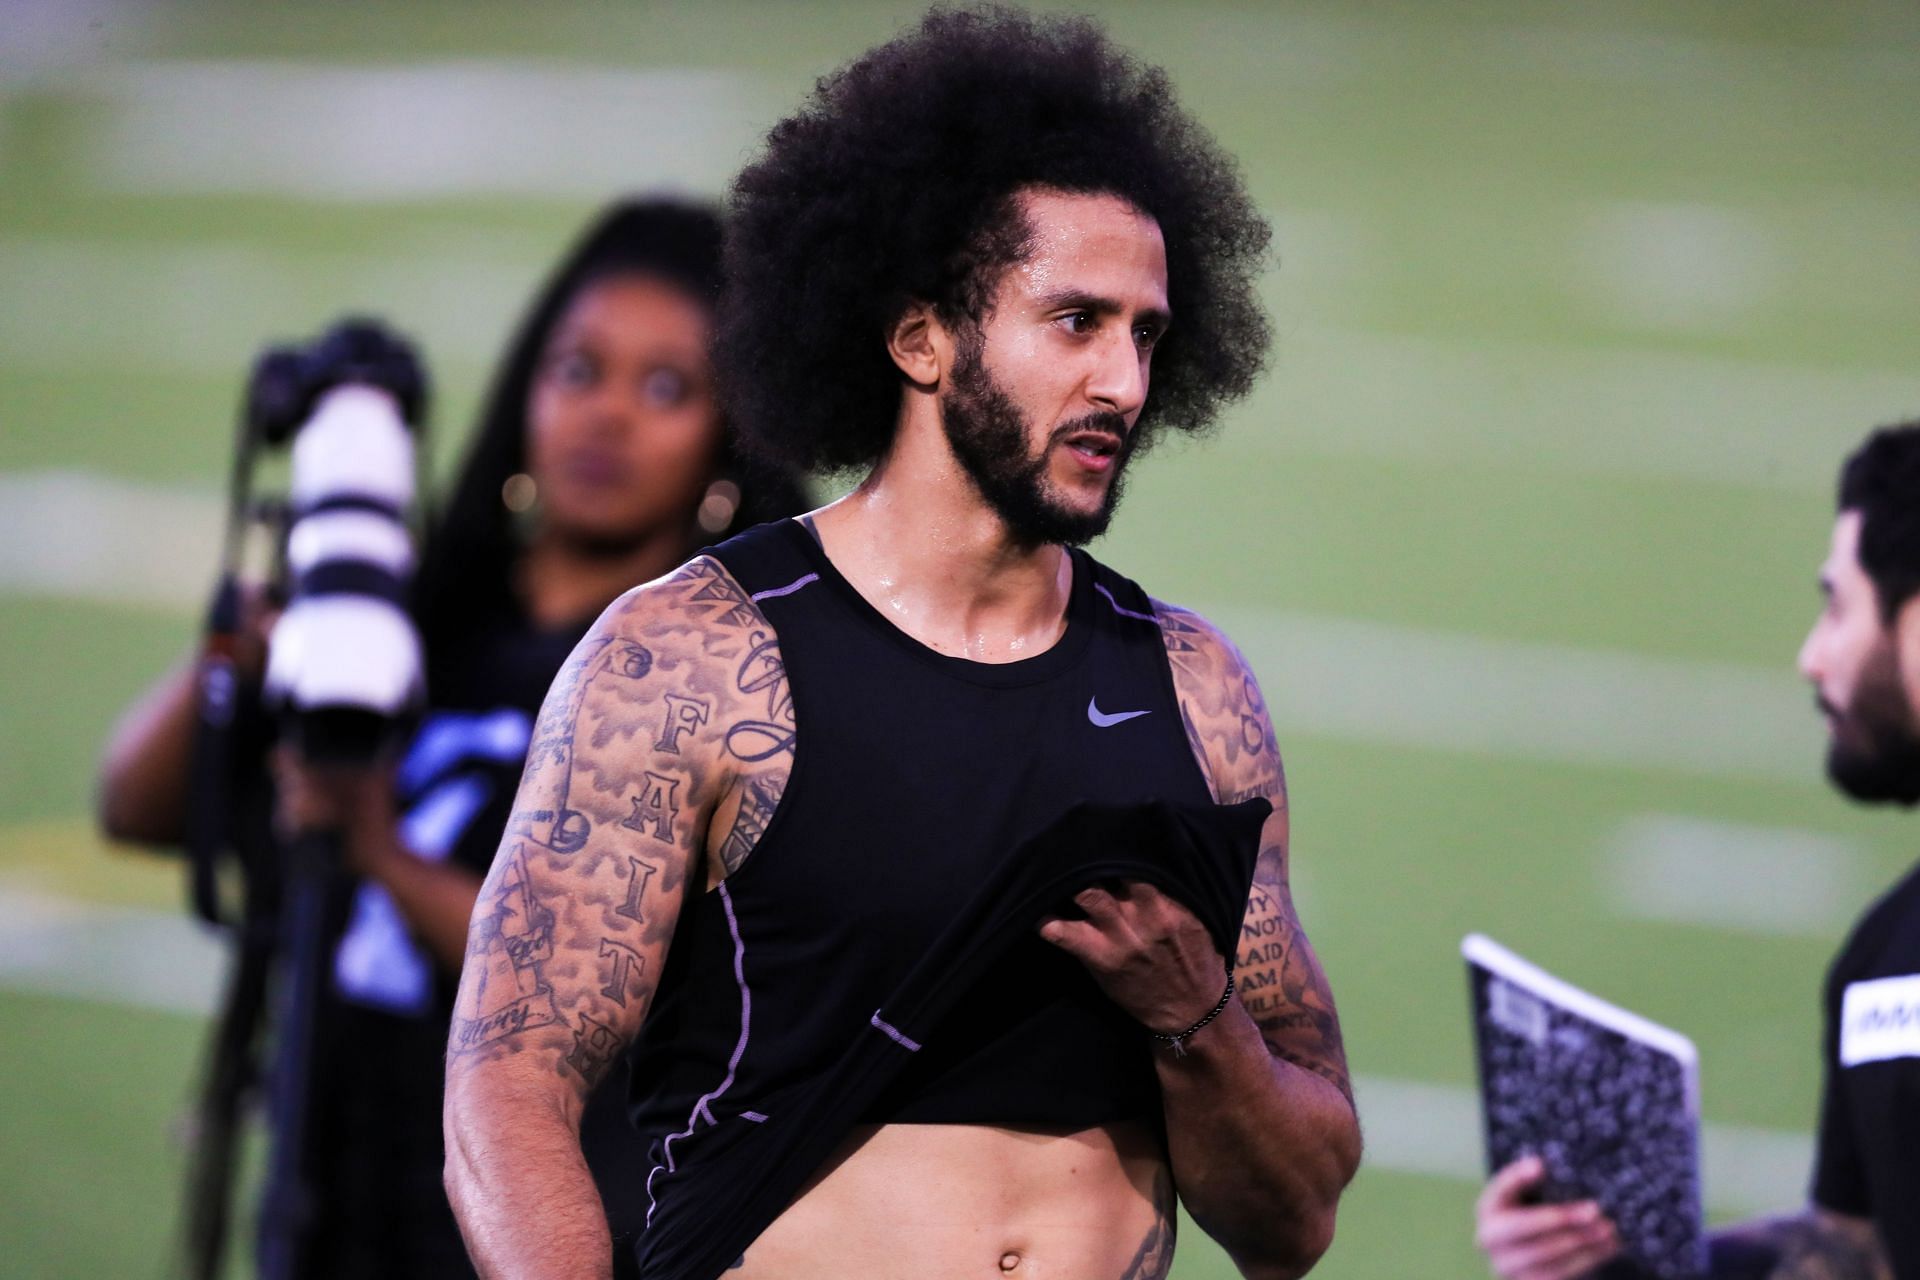 Colin Kaepernick has been kept out of the NFL for many years